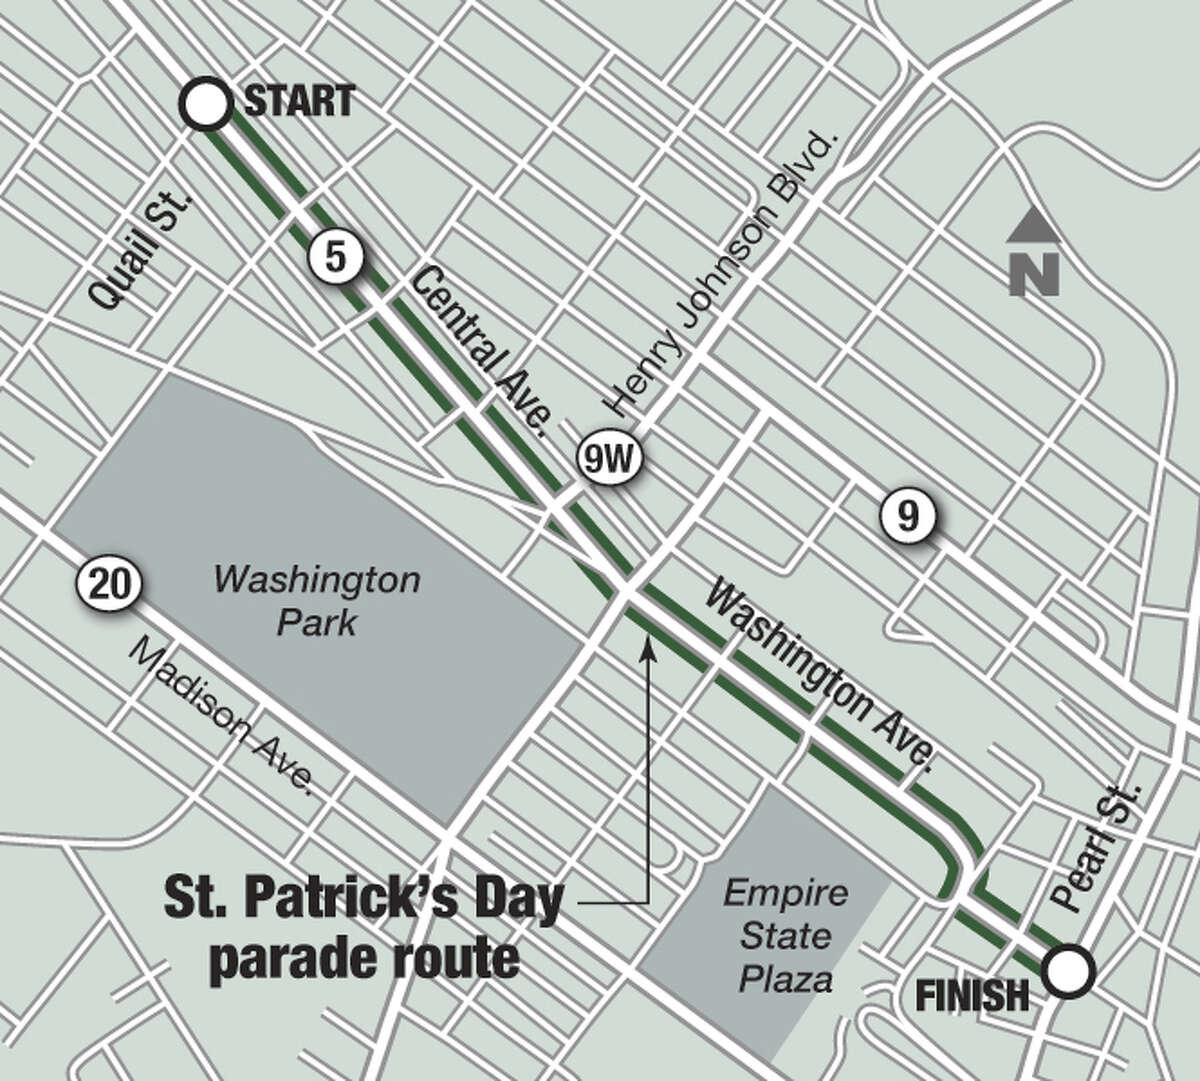 Albany St. Patrick's Day parades step off at 11 and 2